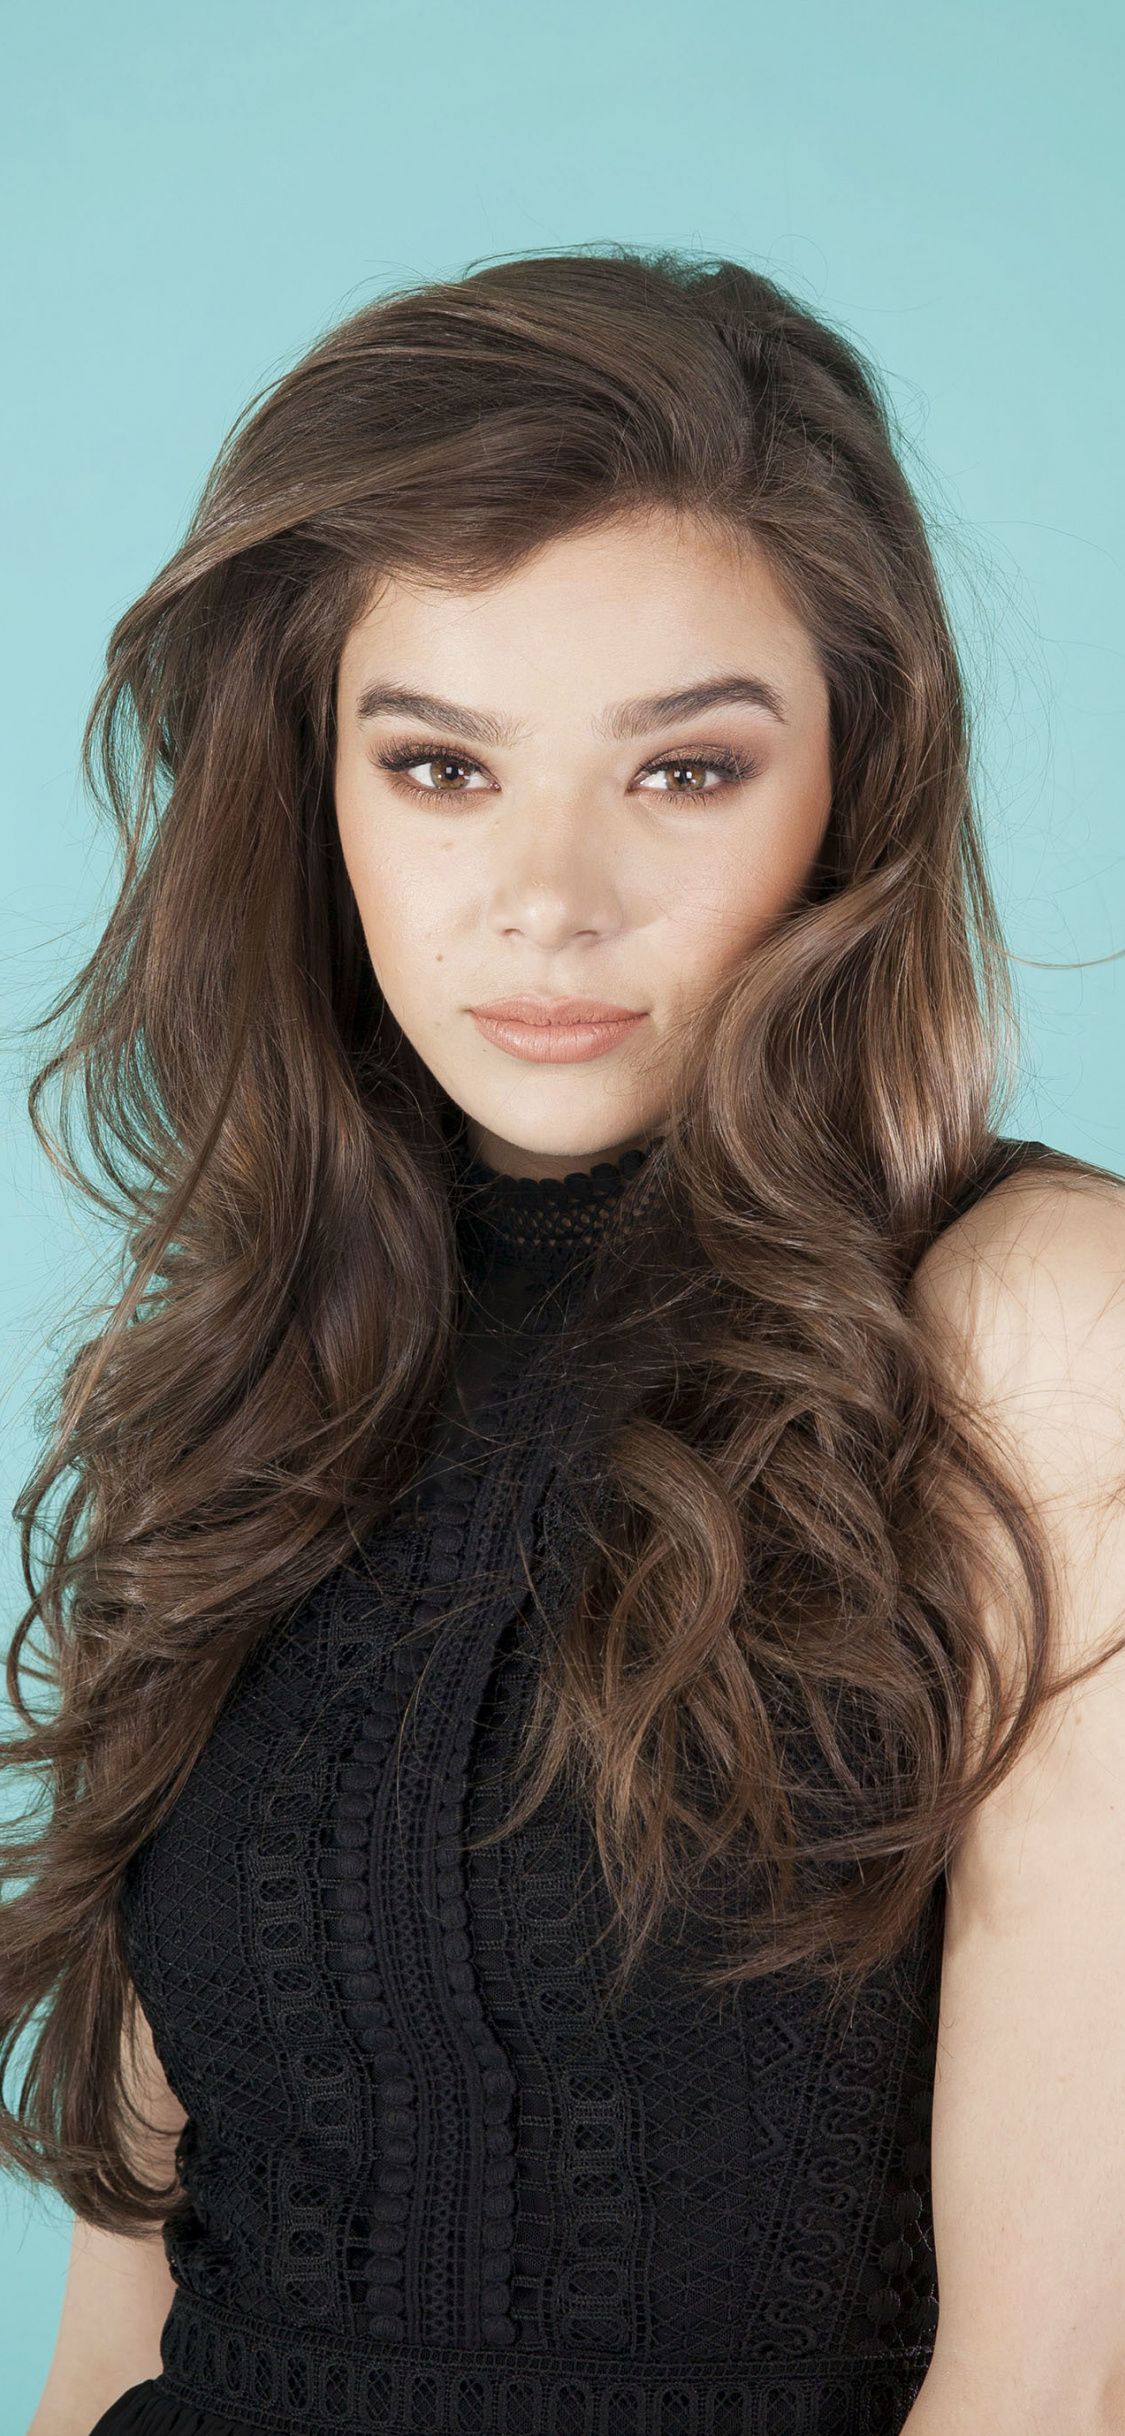 Download 1125x2436 wallpaper hot and beautiful, hailee steinfeld